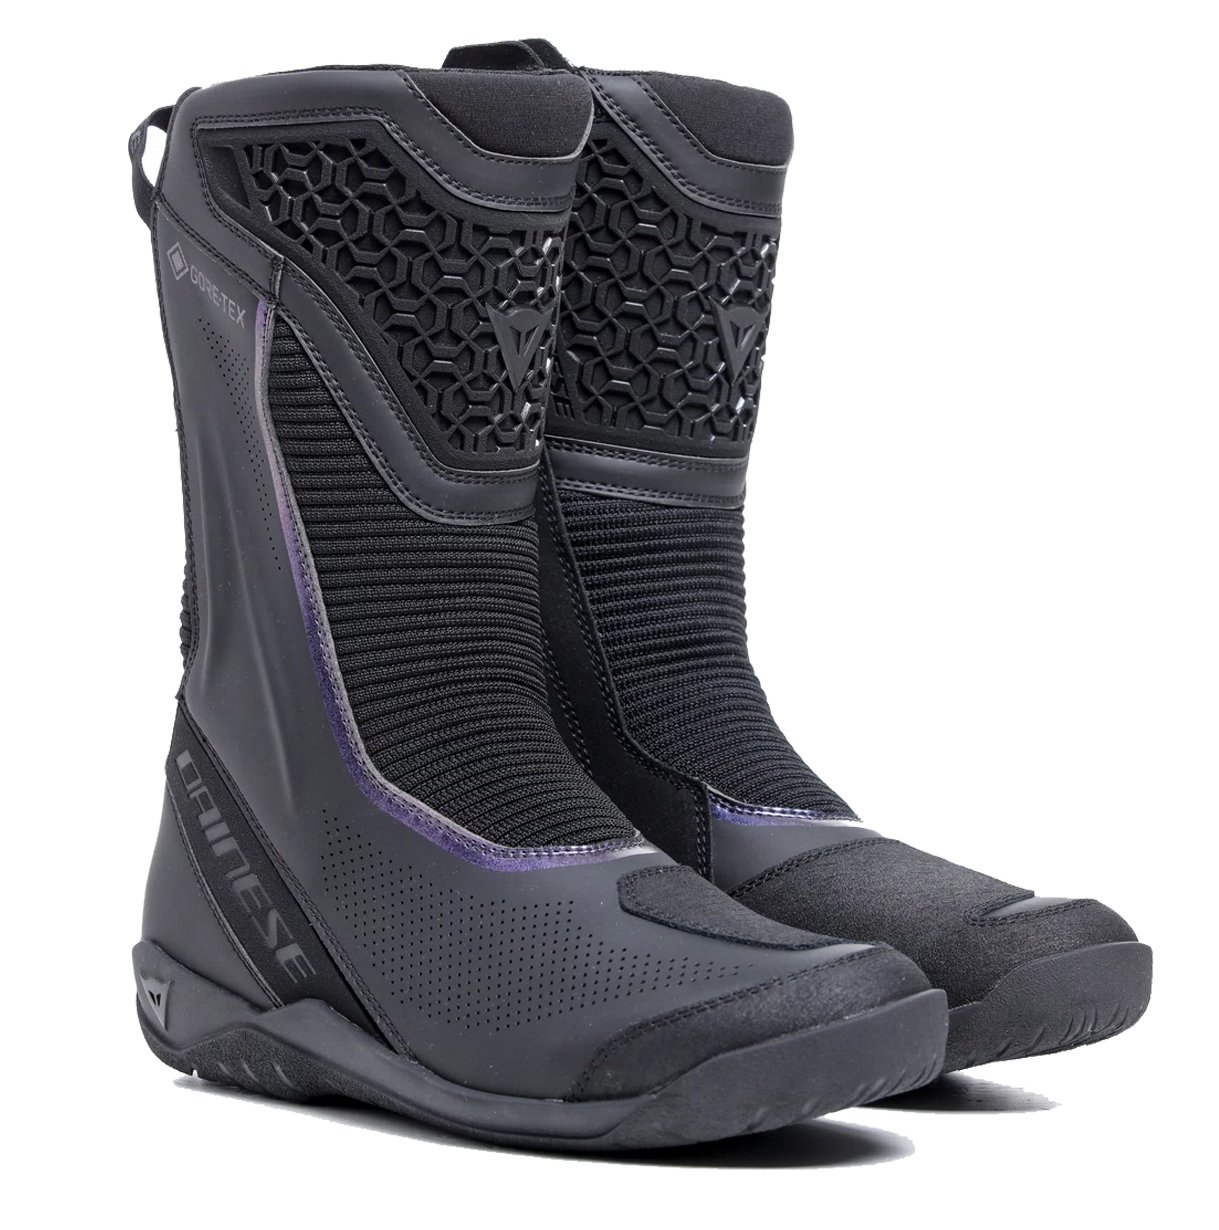 Image of Dainese Freeland 2 Gore-Tex Boots Wmn Black Size 38 ID 8051019693112